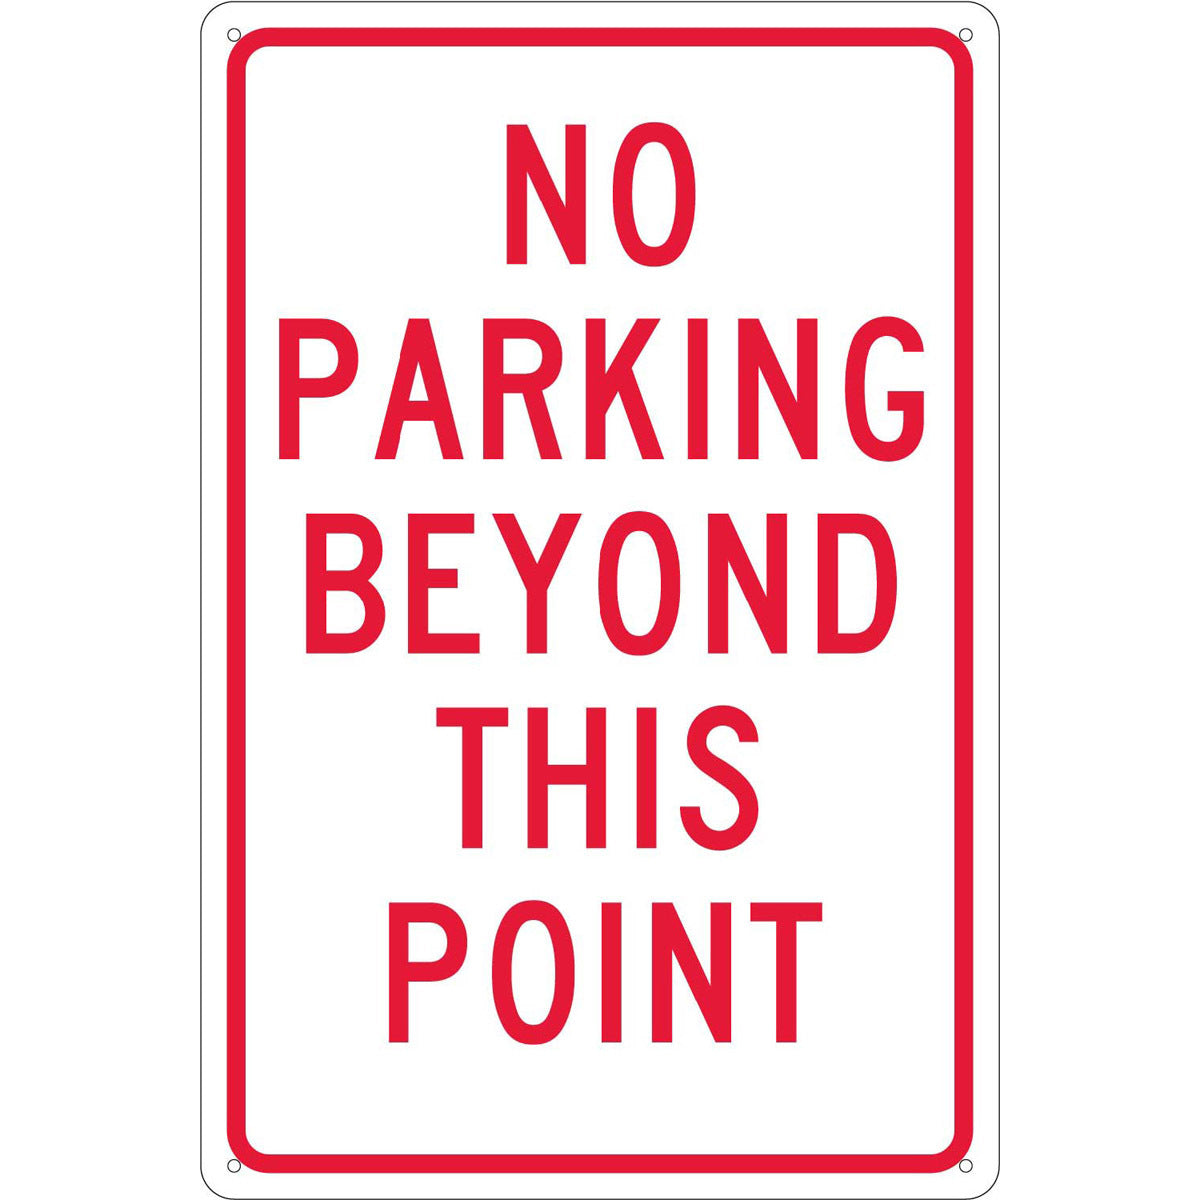 NM 18" X 12" White .04" Aluminum Parking And Traffic Sign "NO PARKING BEYOND THIS POINT"